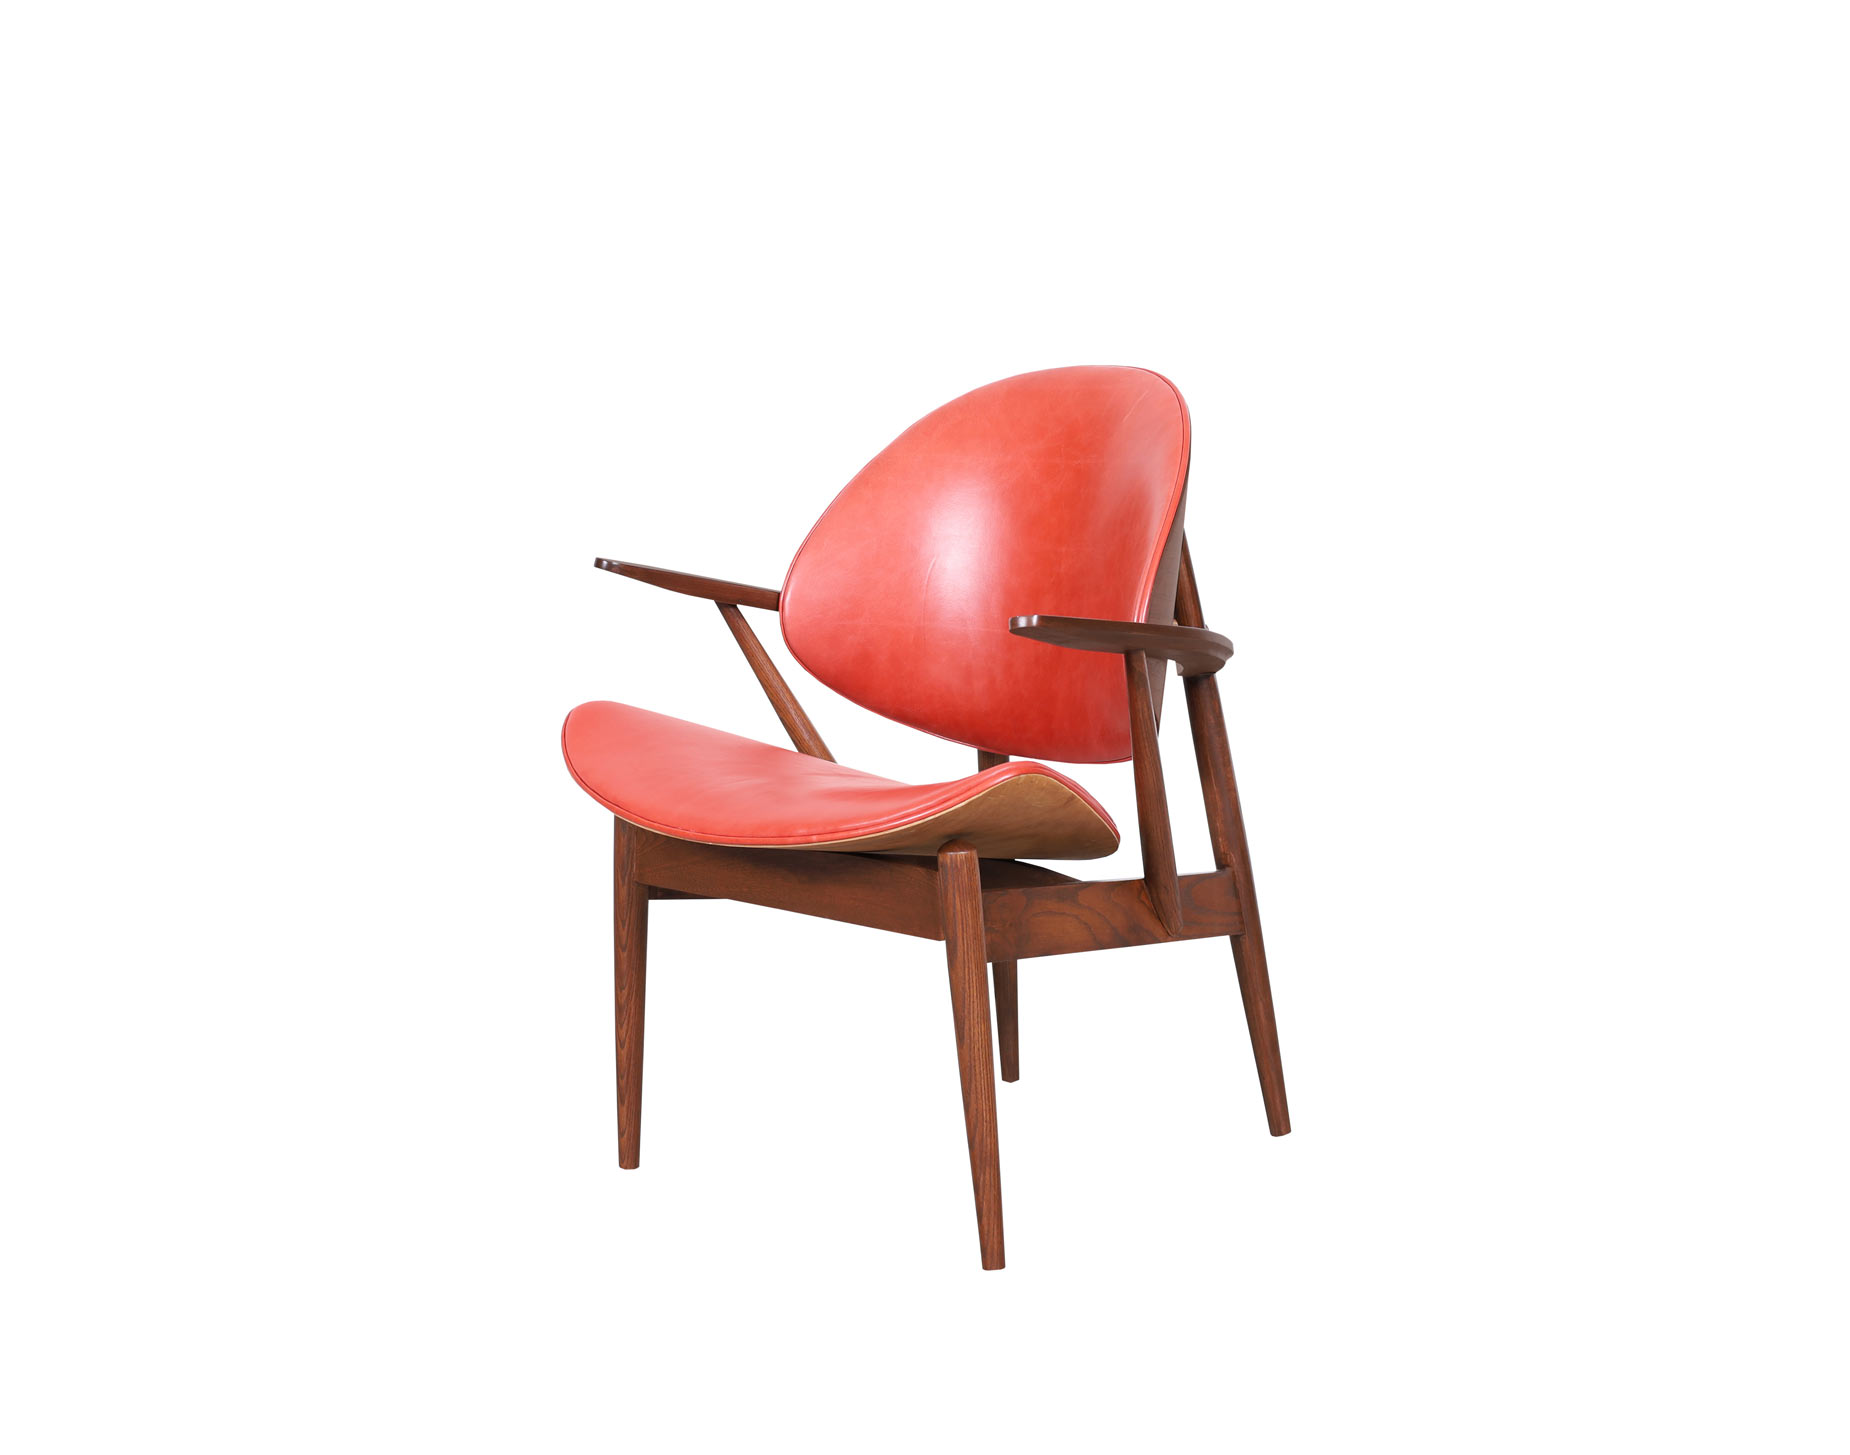 Vintage Leather Clam Shell Arm Chair by Seymour J. Wiener for Kodawood